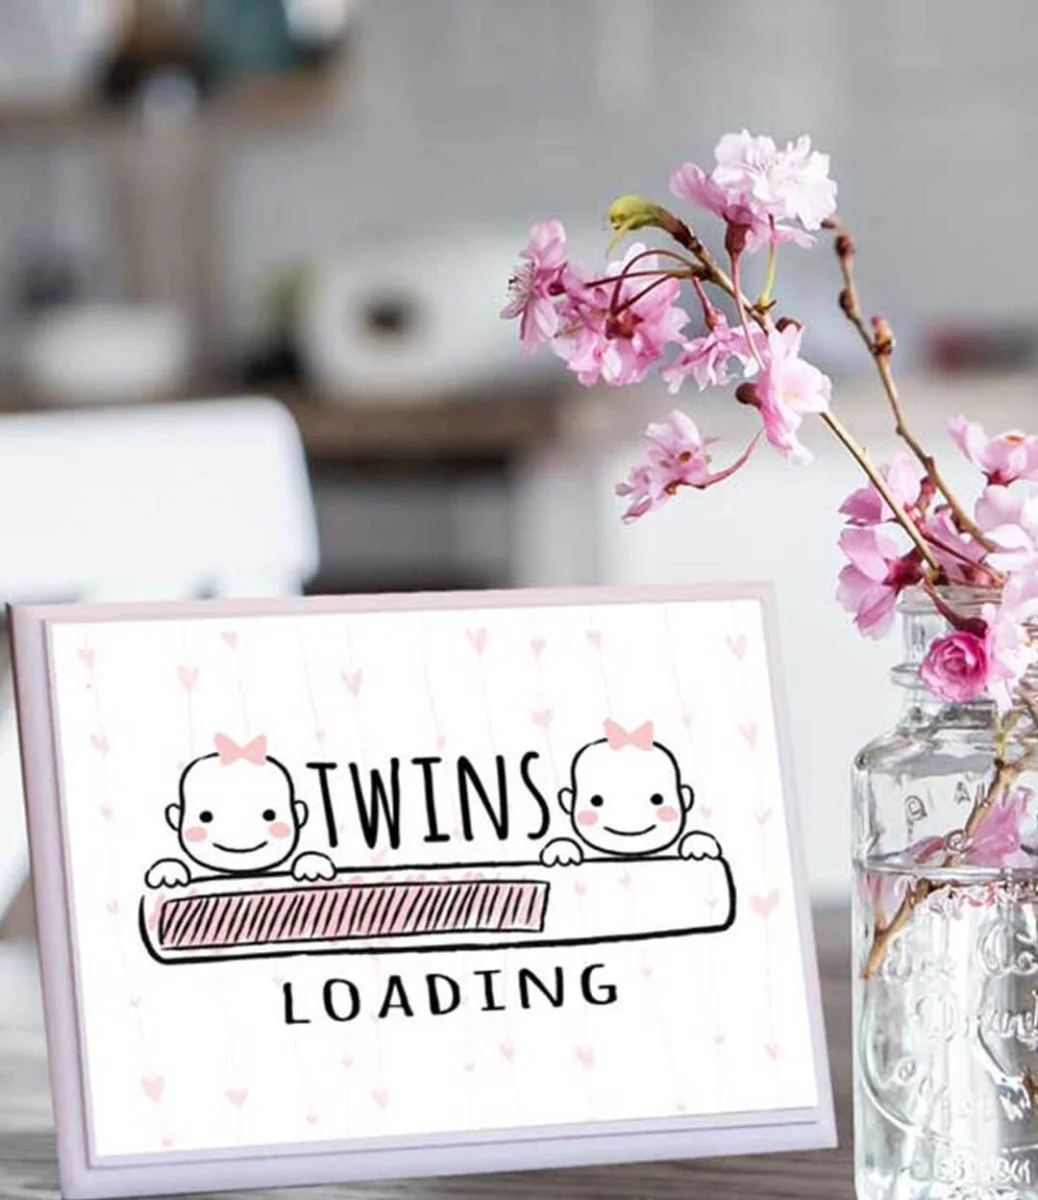 Wooden Plaque With "Twins Loading" Design